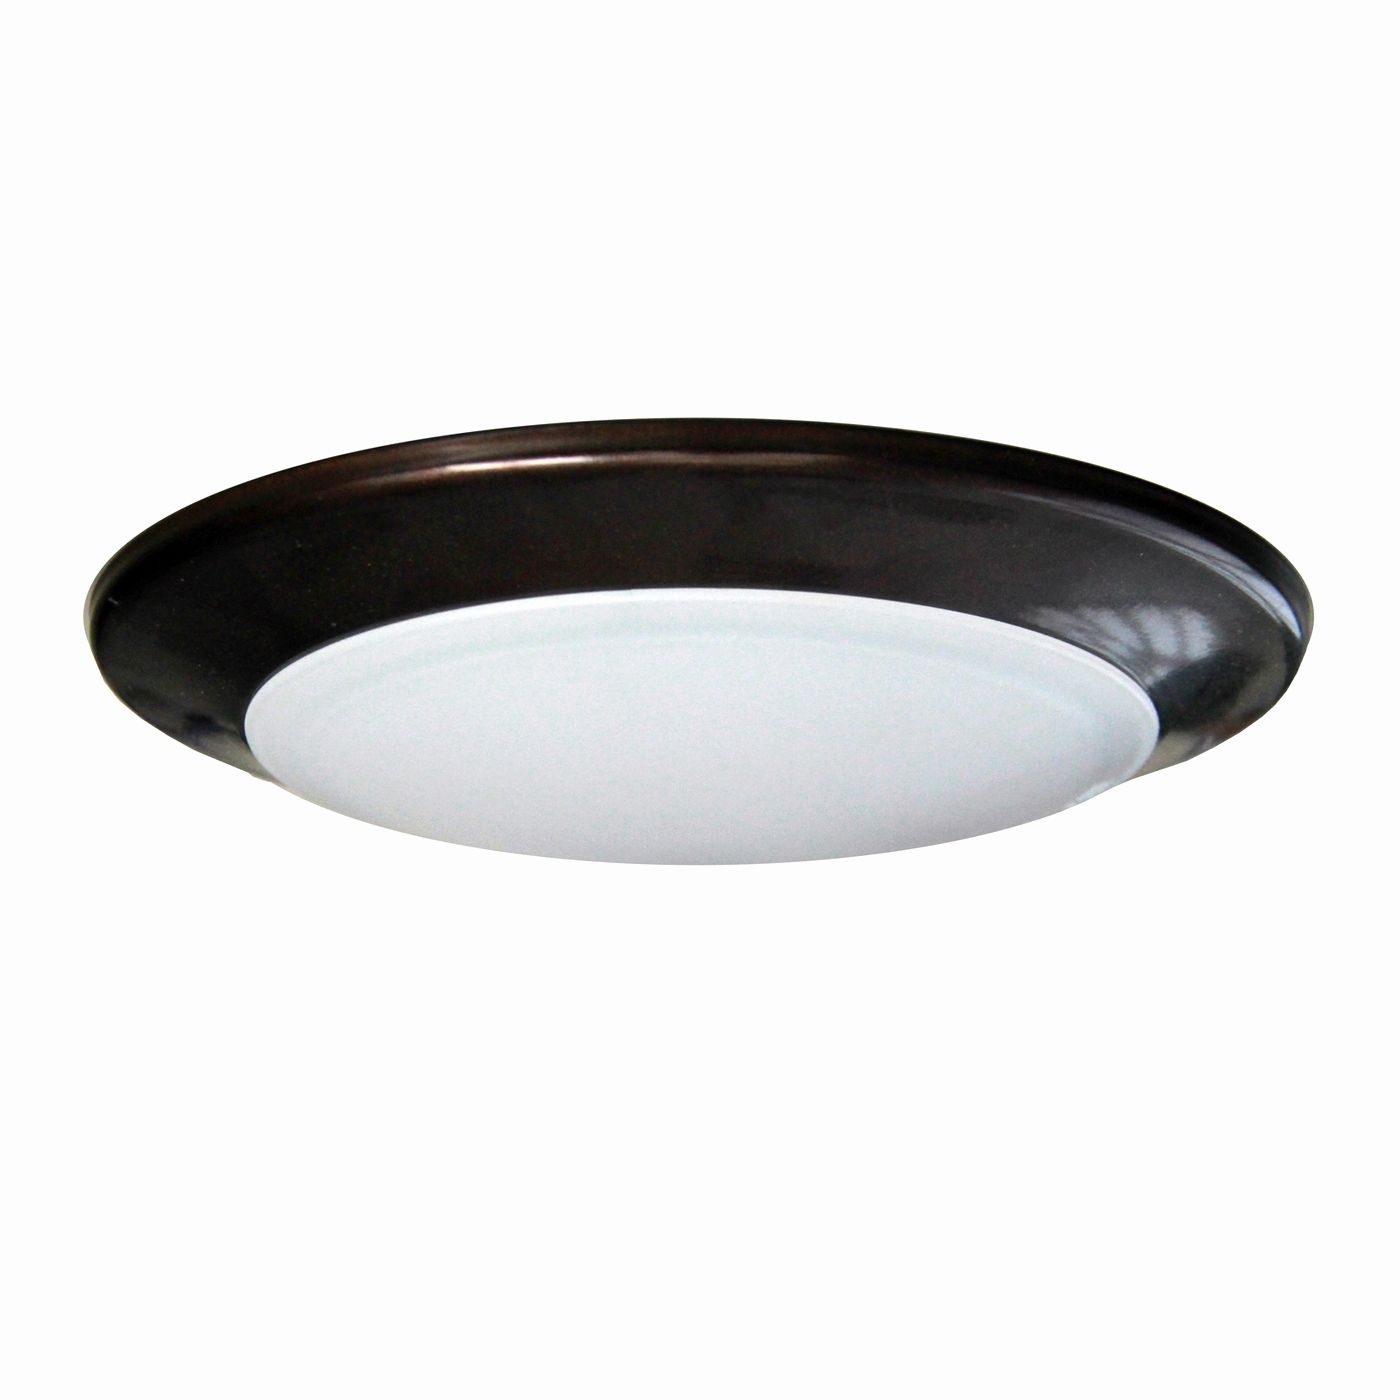 Ceiling Light : Back Porch Ceiling Lights Outdoor Ceiling Lights For Current Outdoor Ceiling Lights At Ebay (View 10 of 20)